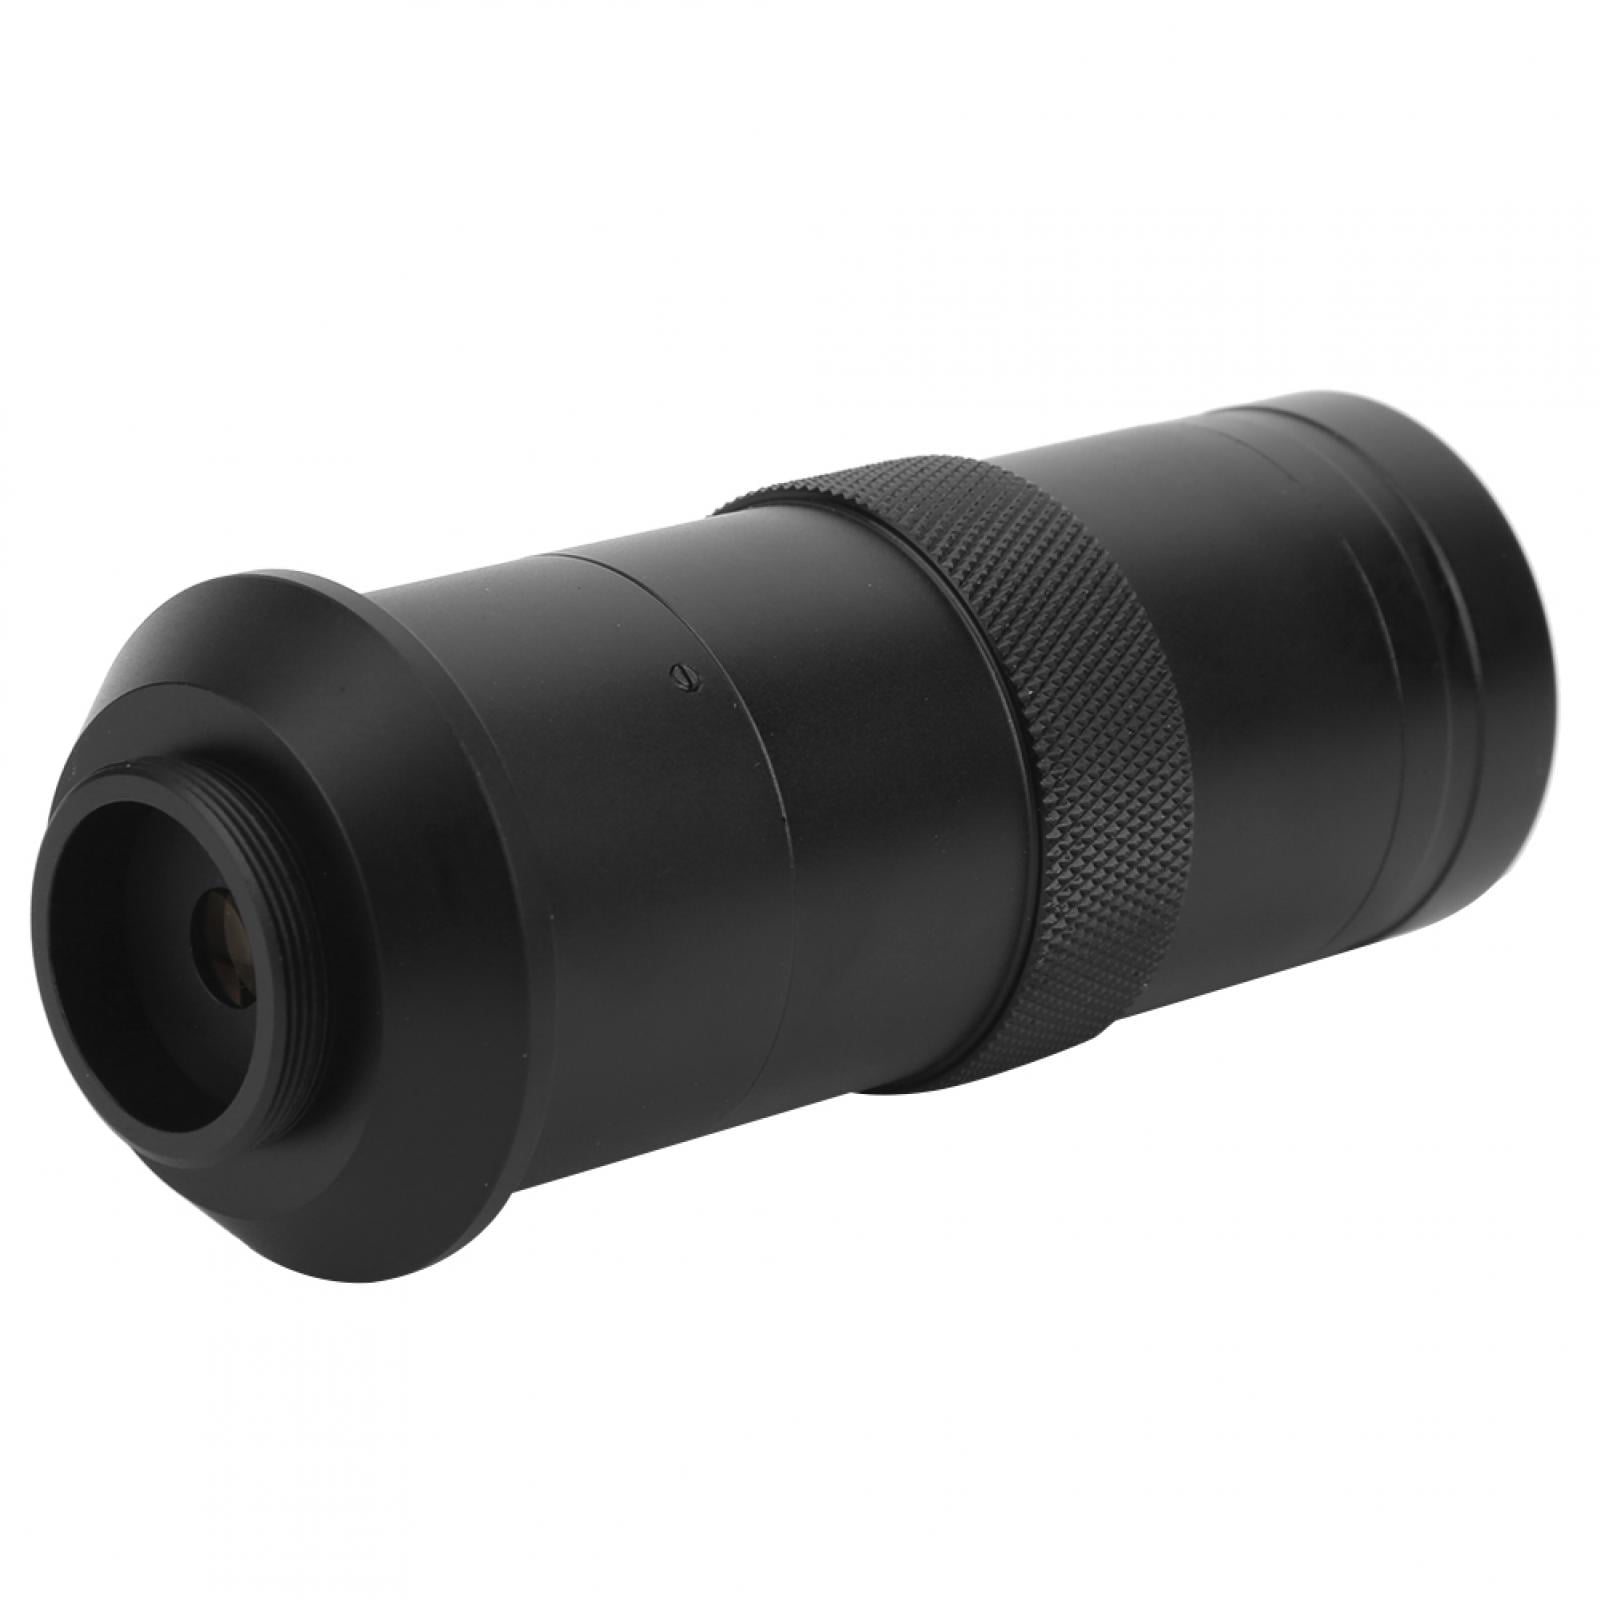 Camera Magnifying Lens 25mm Zoom Microscope Adapter C-Mount Lens 8X-100X C-Mount Lens for CCD Camera CCD Industrial Microscope Camera Practical Accessory